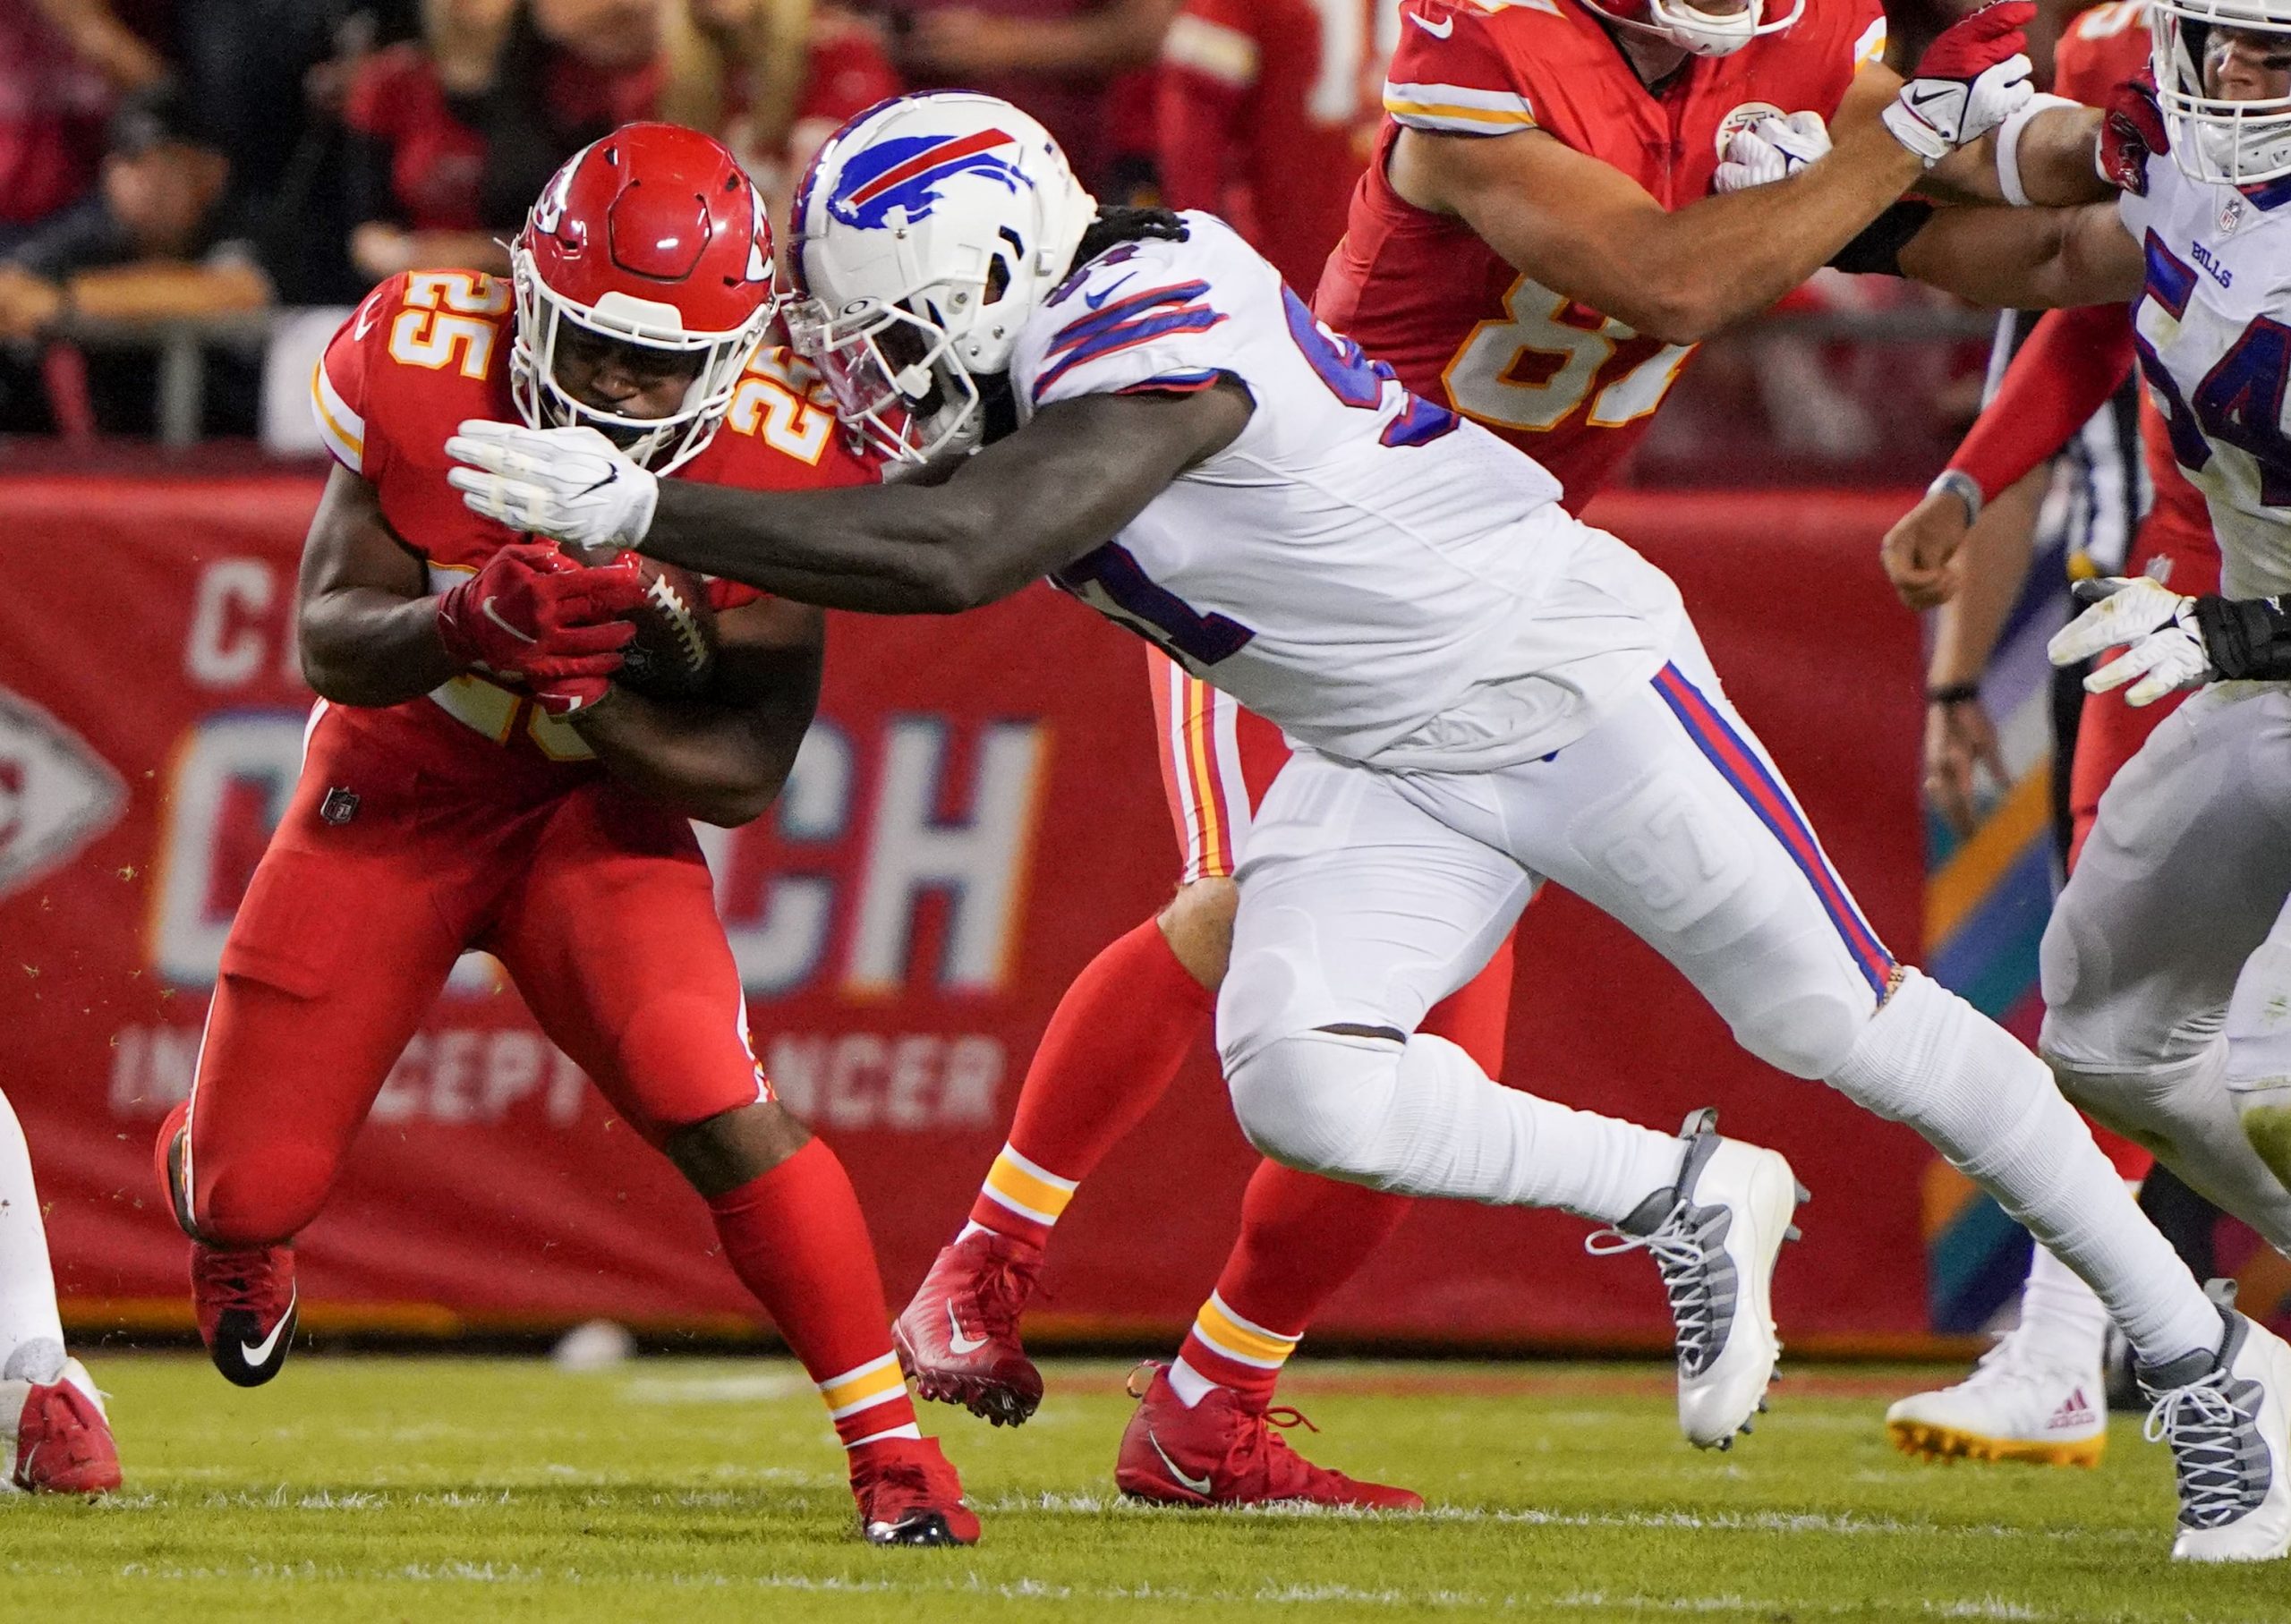 Kansas City Chiefs running back Clyde Edwards-Helaire (25) runs the ball as Buffalo Bills defensive end Mario Addison (97) makes the tackle during the first half at GEHA Field at Arrowhead Stadium